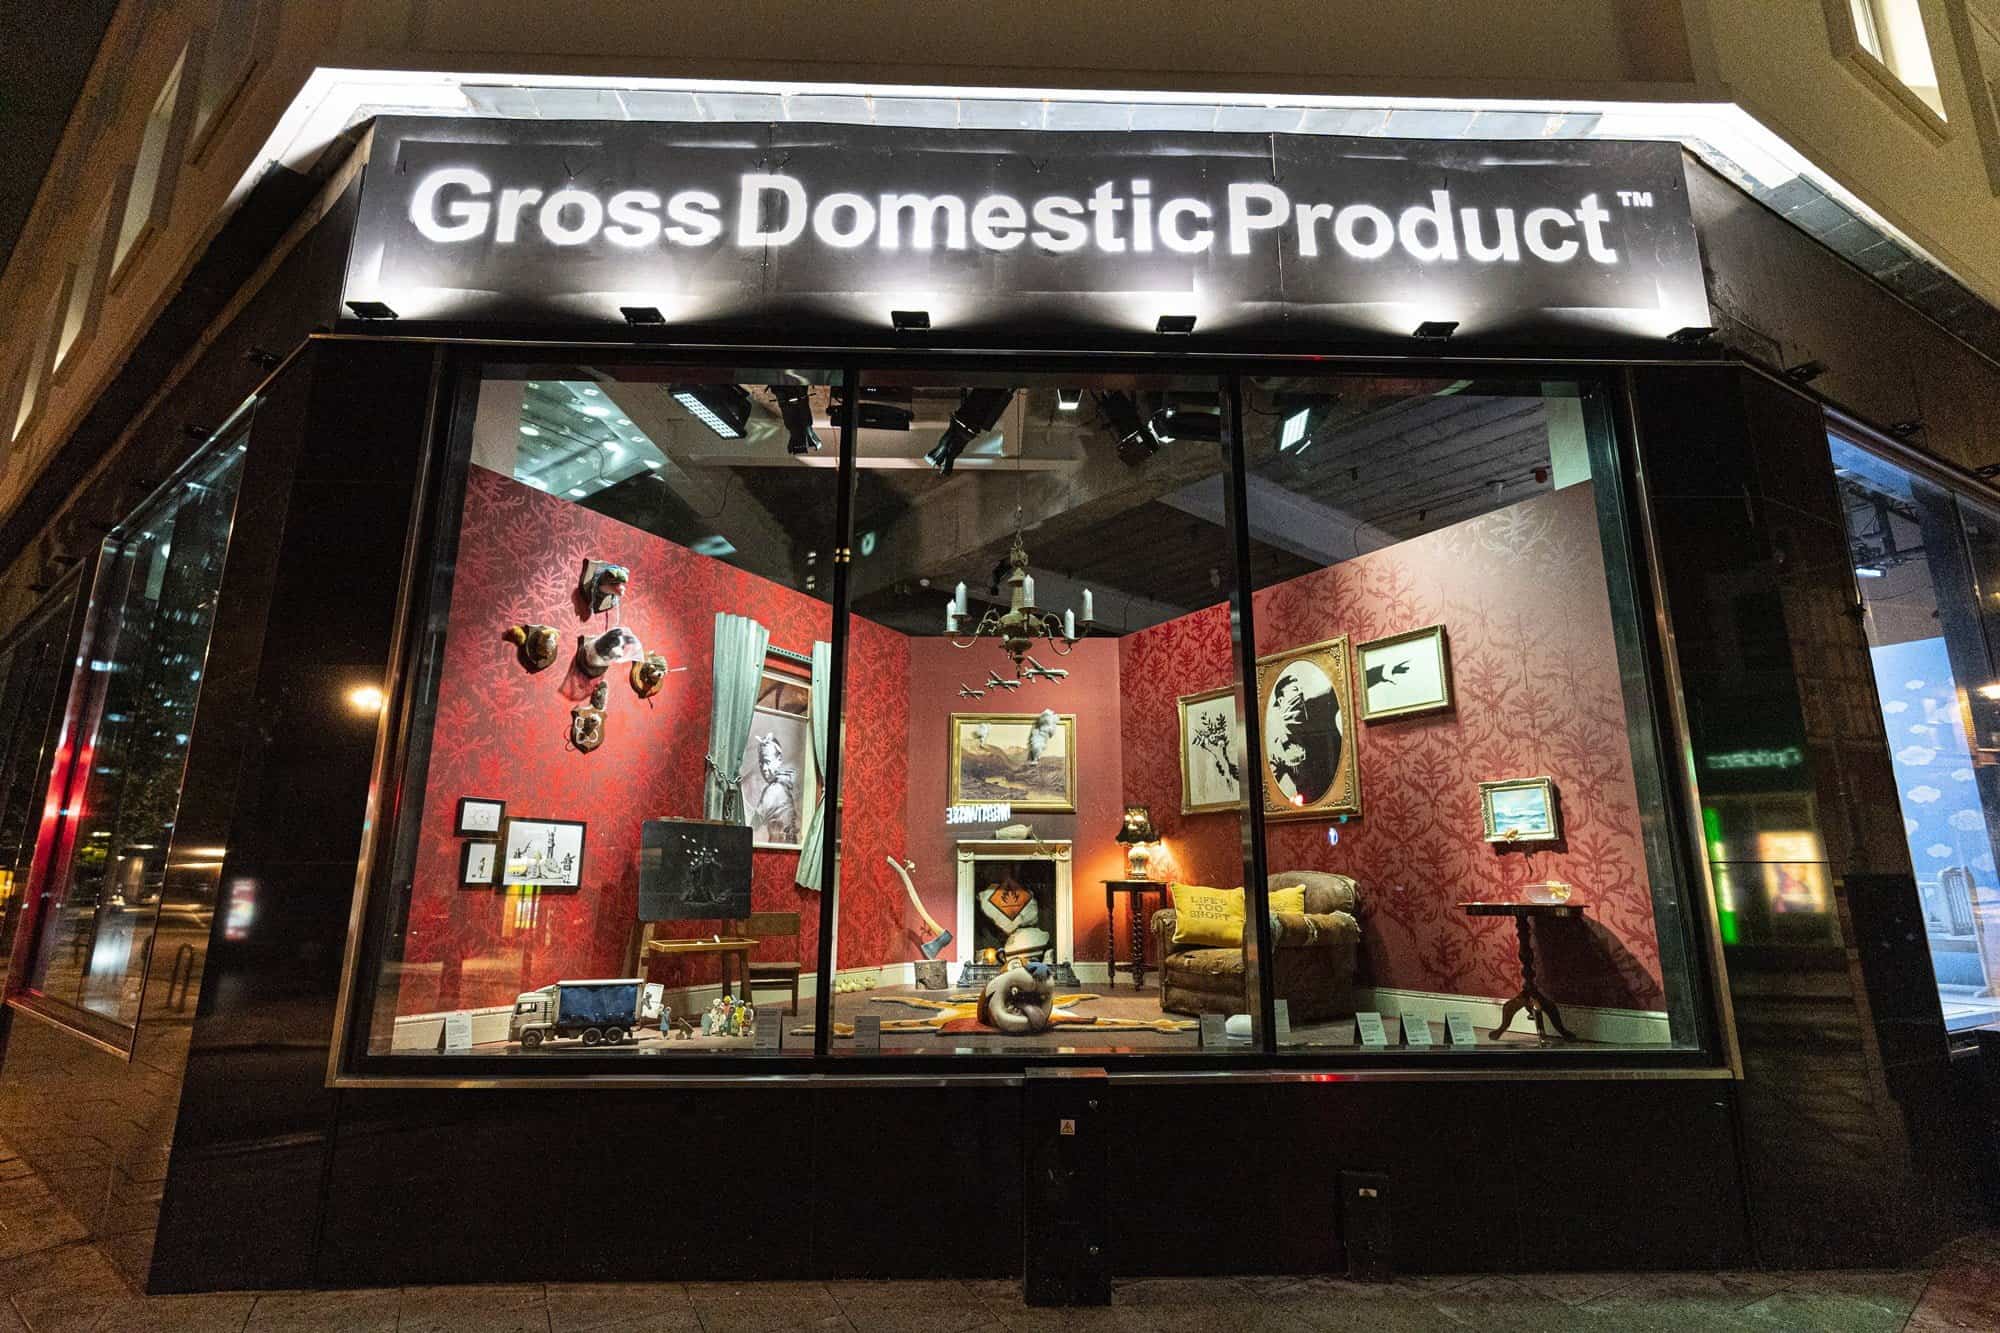 Banksy - Gross Domestic Product